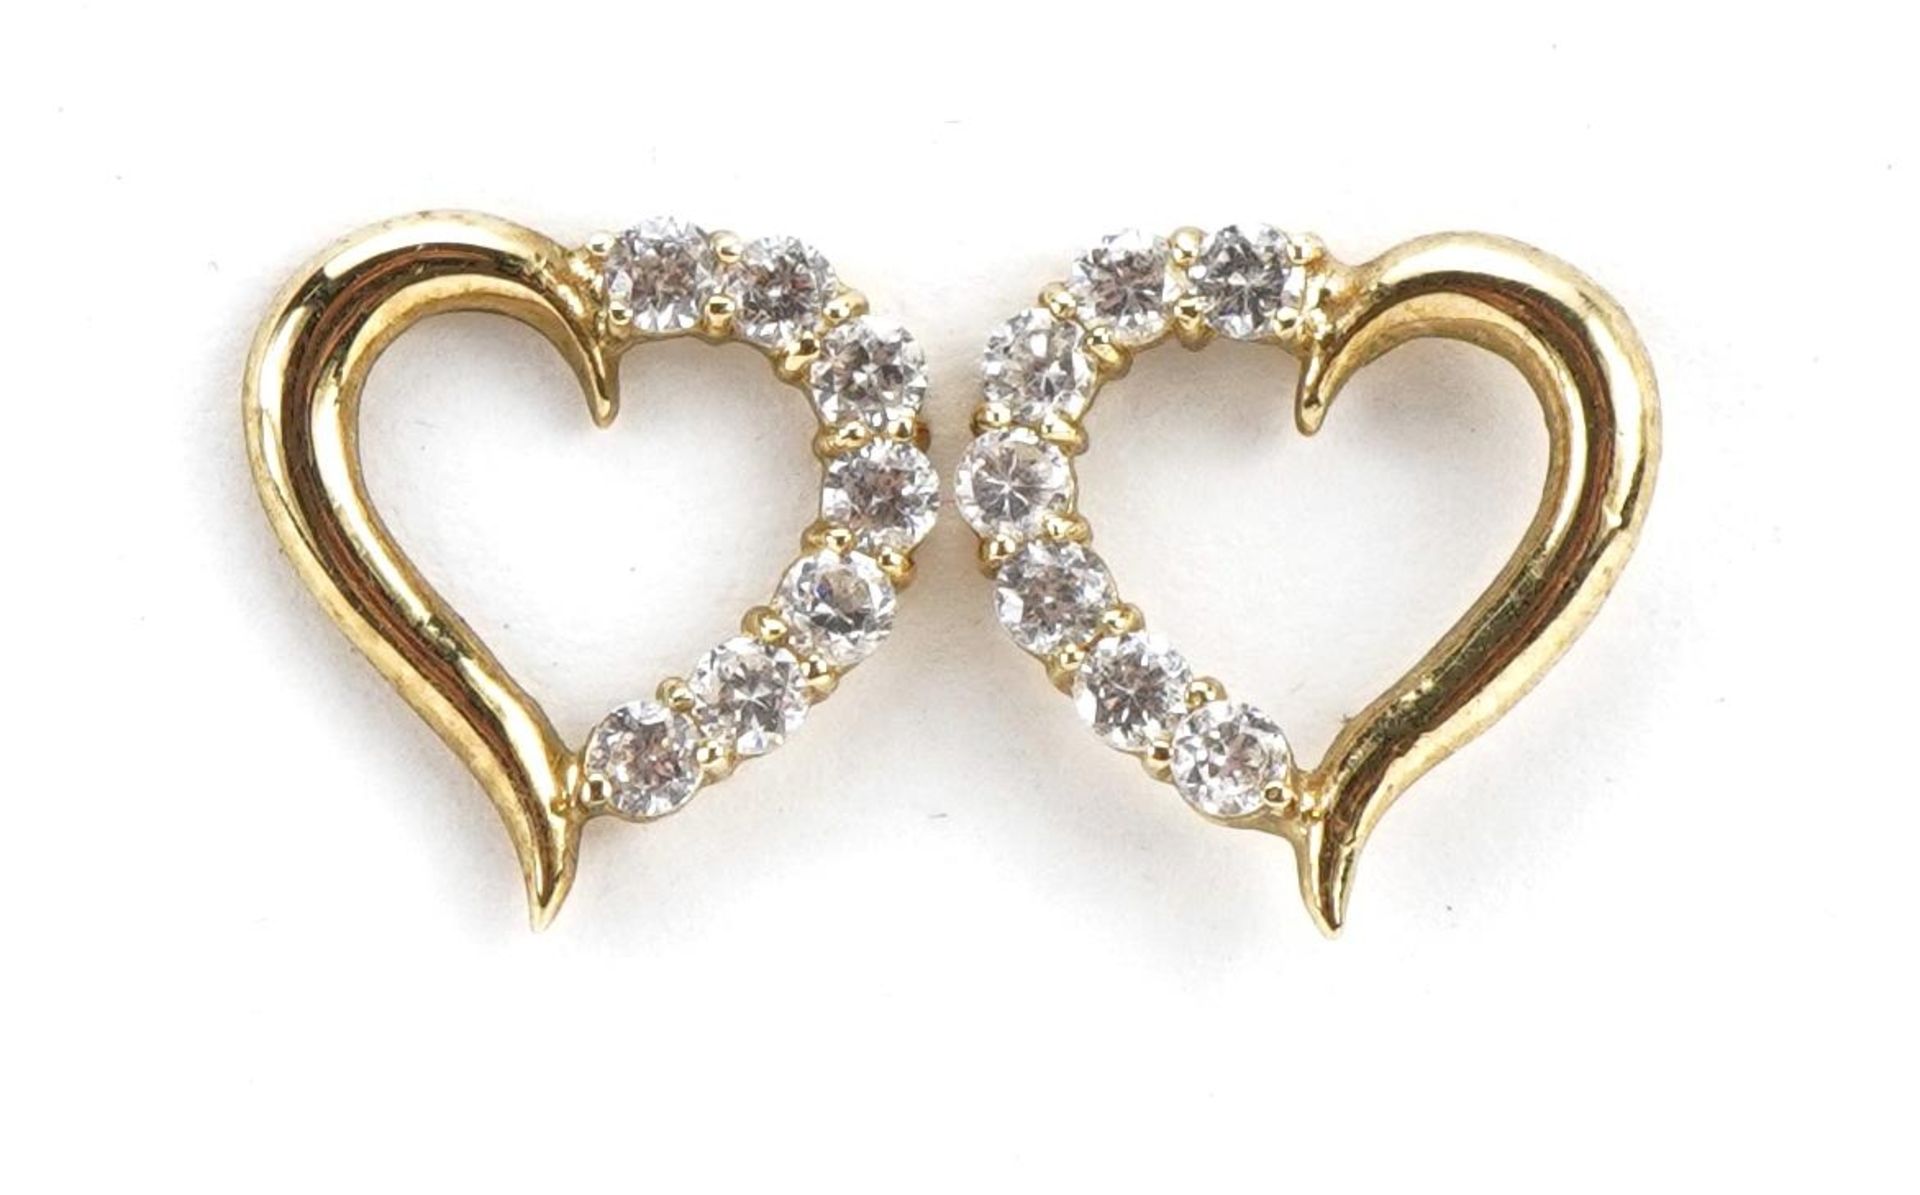 Pair 9ct gold clear stone love heart stud earrings, 1.2cm high, 0.9g : For further information on